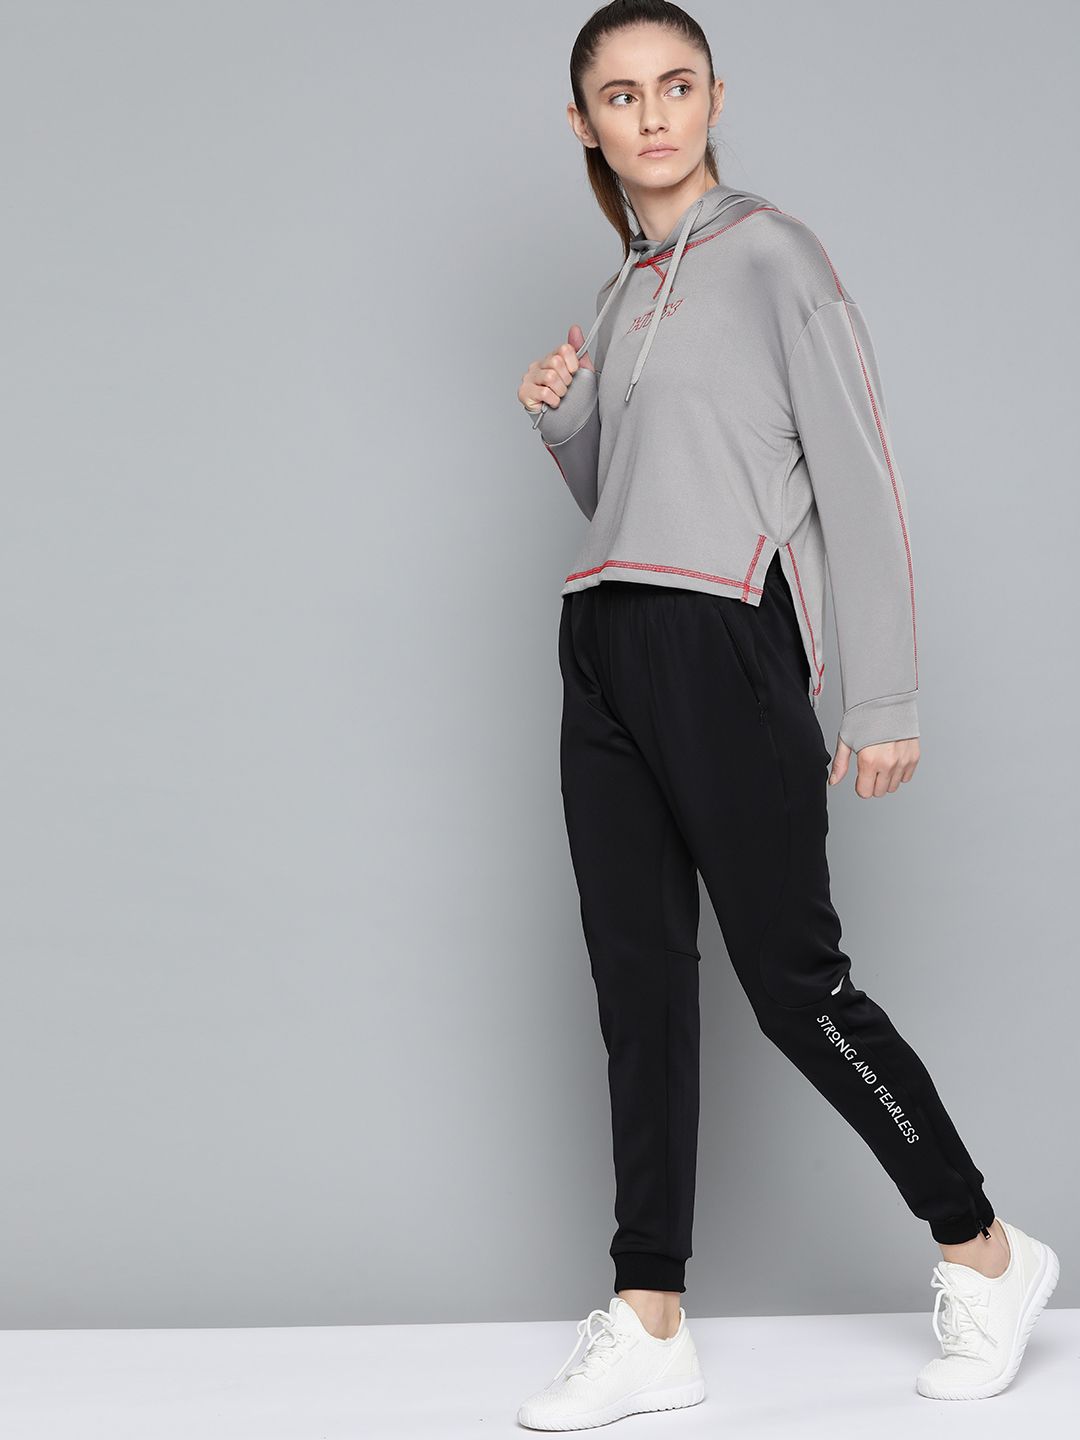 HRX By Hrithik Roshan Lifestyle Women Wet Weather Rapid-Dry Solid Sweatshirt Price in India